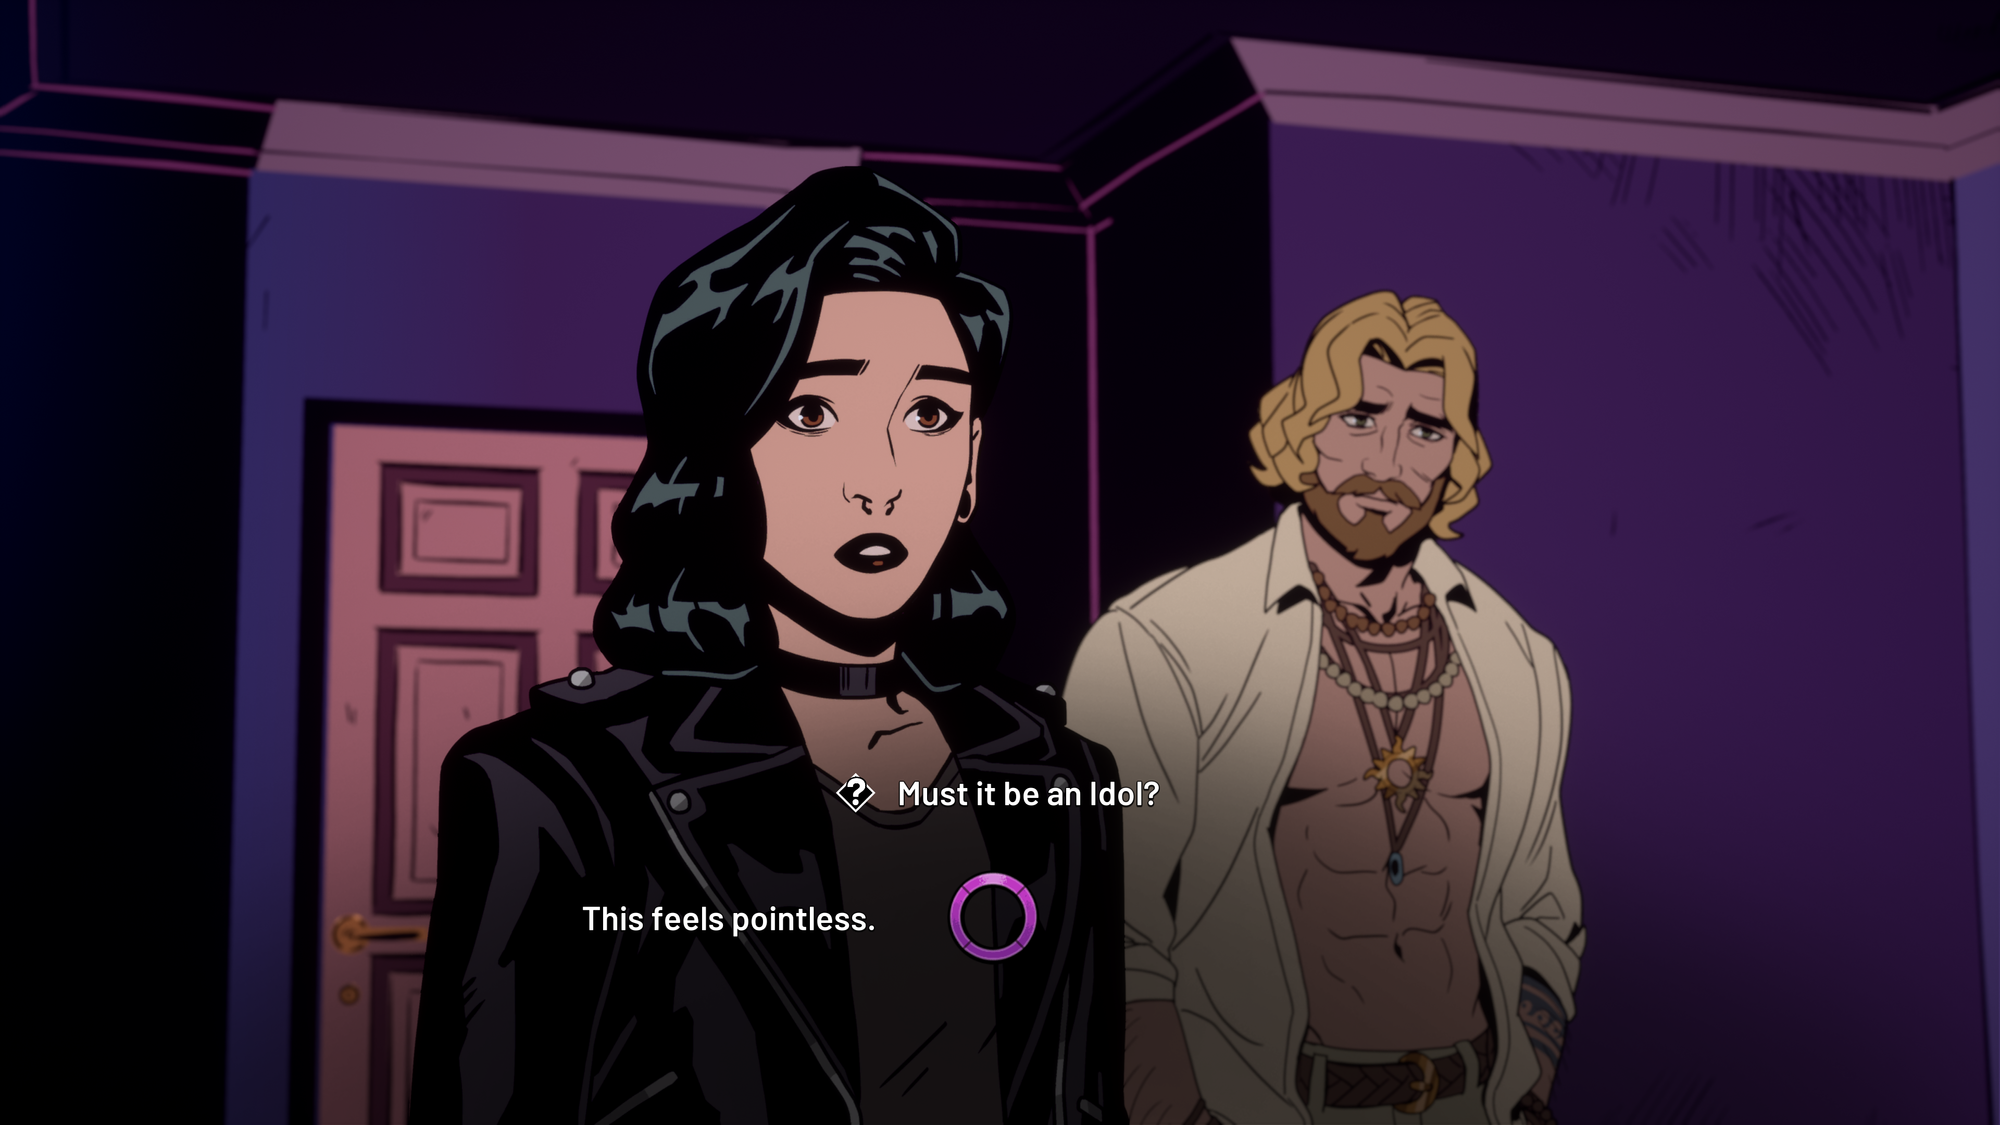 Grace is facing the camera, with Apollo to her right. Two dialogue options are available. At the top, one with a question mark reads “Must it be an Idol?” and to the left it reads “This feels pointless.”